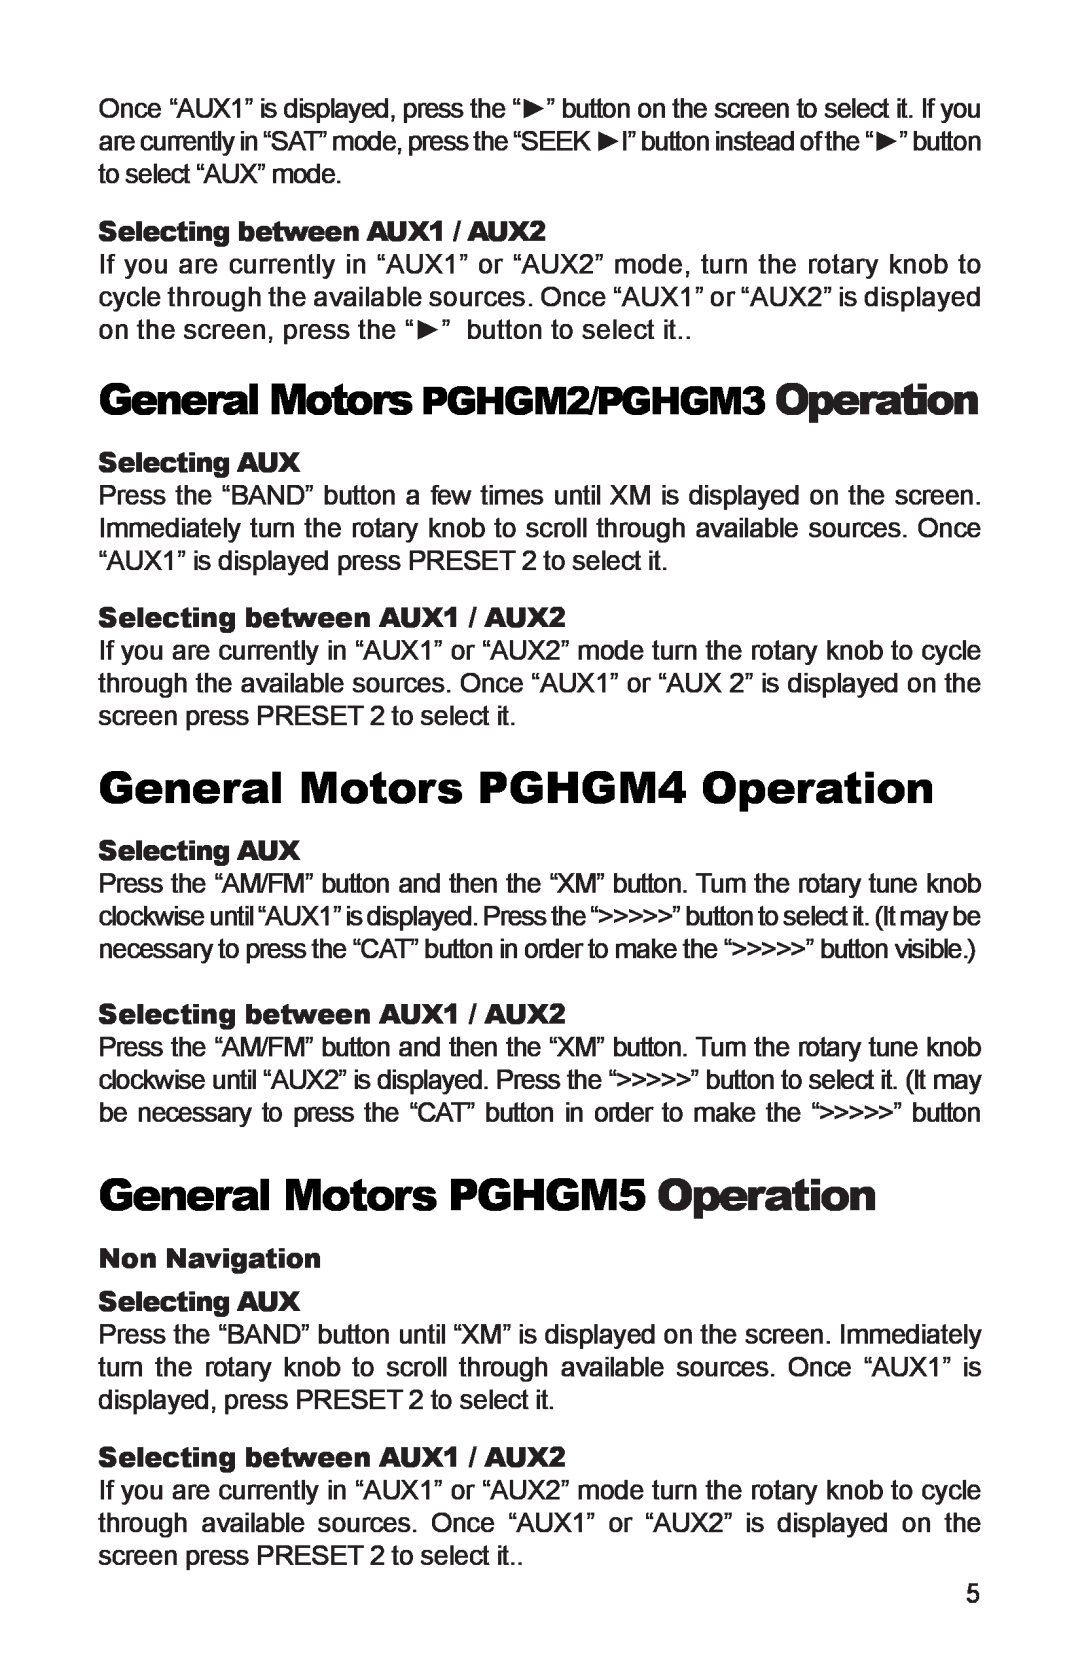 iSimple PGHNI2 General Motors PGHGM4 Operation, General Motors PGHGM5 Operation, General Motors PGHGM2/PGHGM3 Operation 